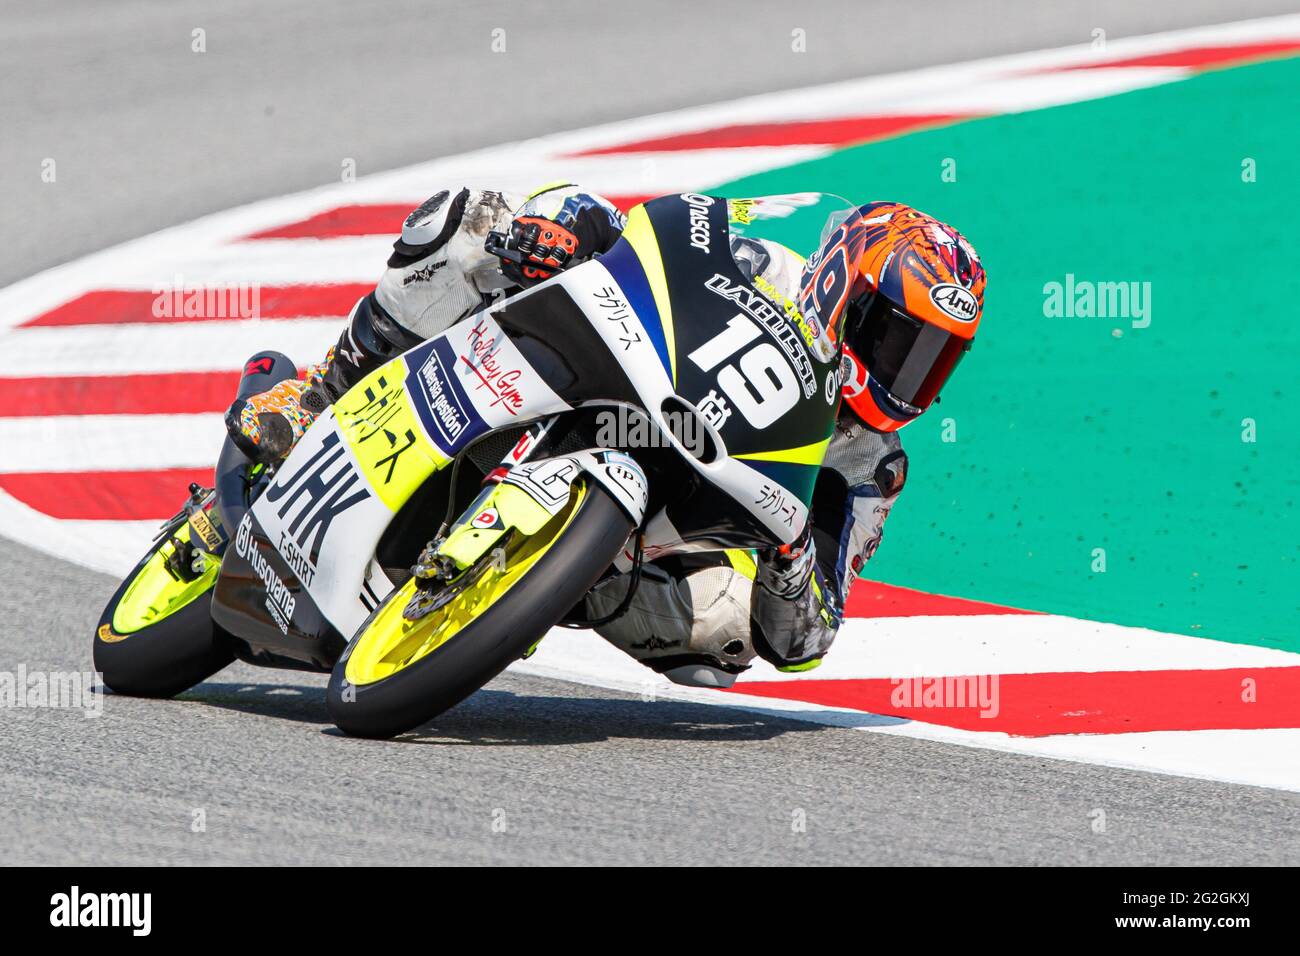 Montmelo, Barcelona, Spain. 11th June, 2021. Alessandro Morosi from Italia,  rider of Laglisse Academy team with Husqvarna during the Official Testing  Session Moto 3 of FIM CEV Repsol Barcelona in Circuit Barcelona-Catalunya.